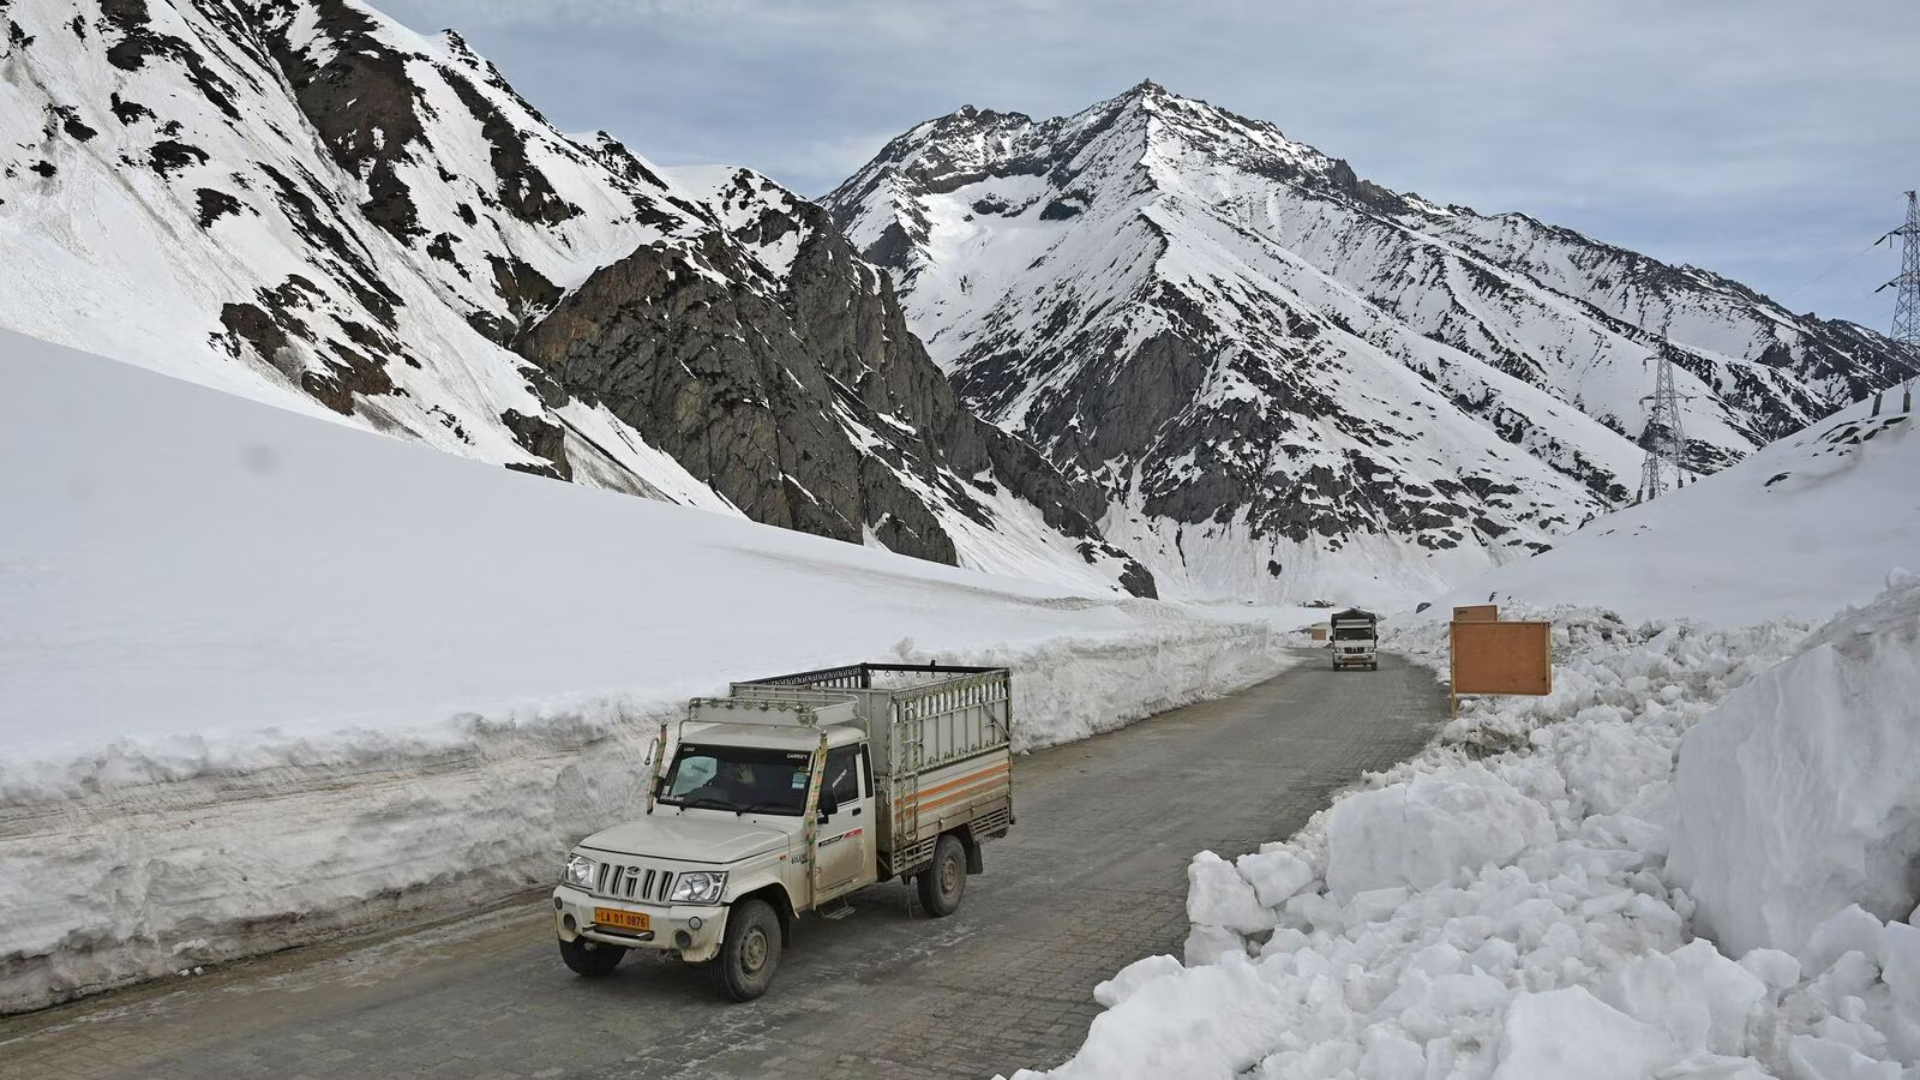 Ladakh tourism gets a boost as UT opens up restricted areas for domestic tourists.